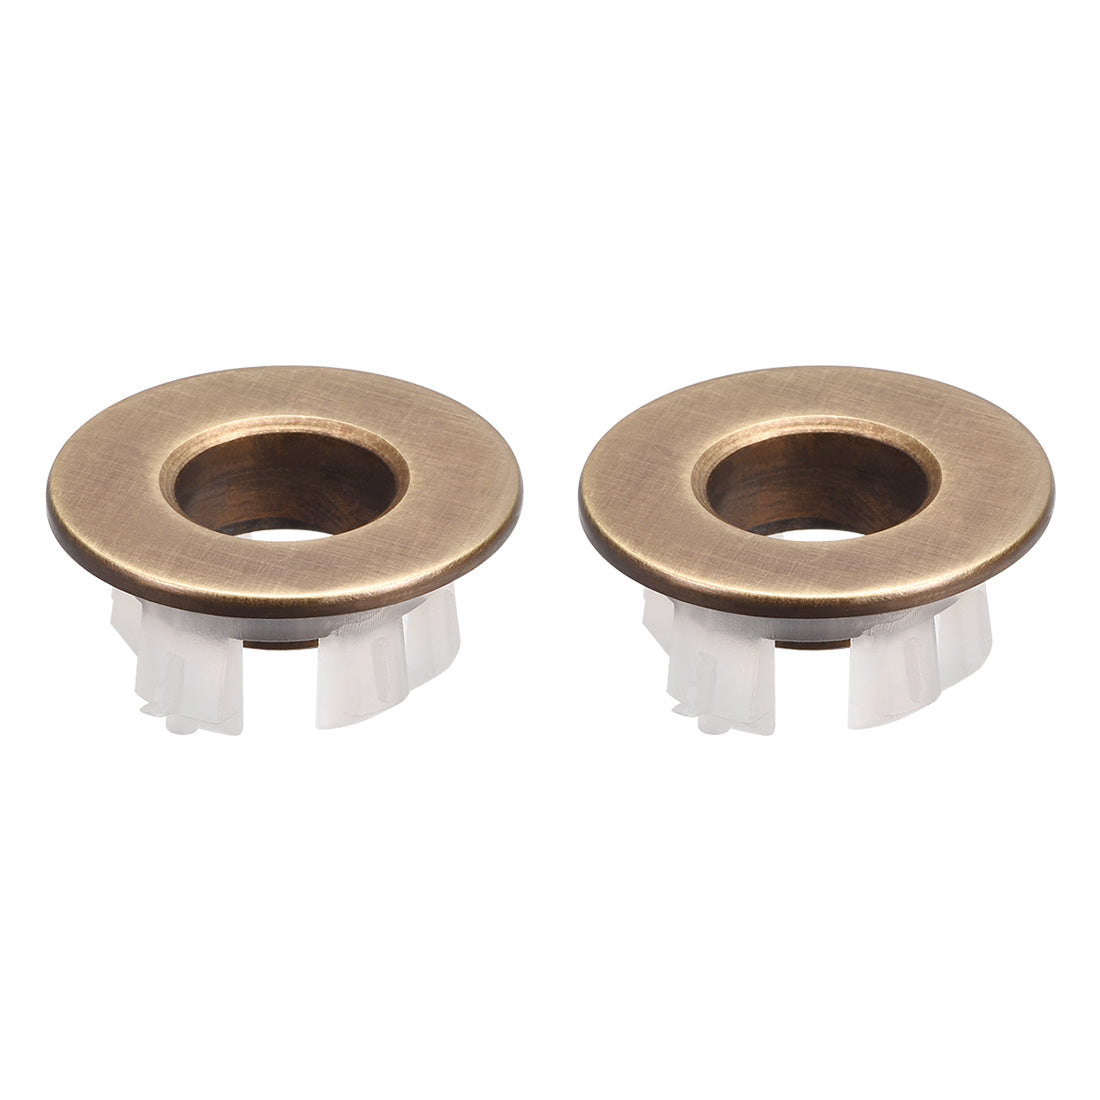 uxcell Uxcell Sink Basin Trim Overflow Cover Copper Insert in Hole Round Caps 2Pcs